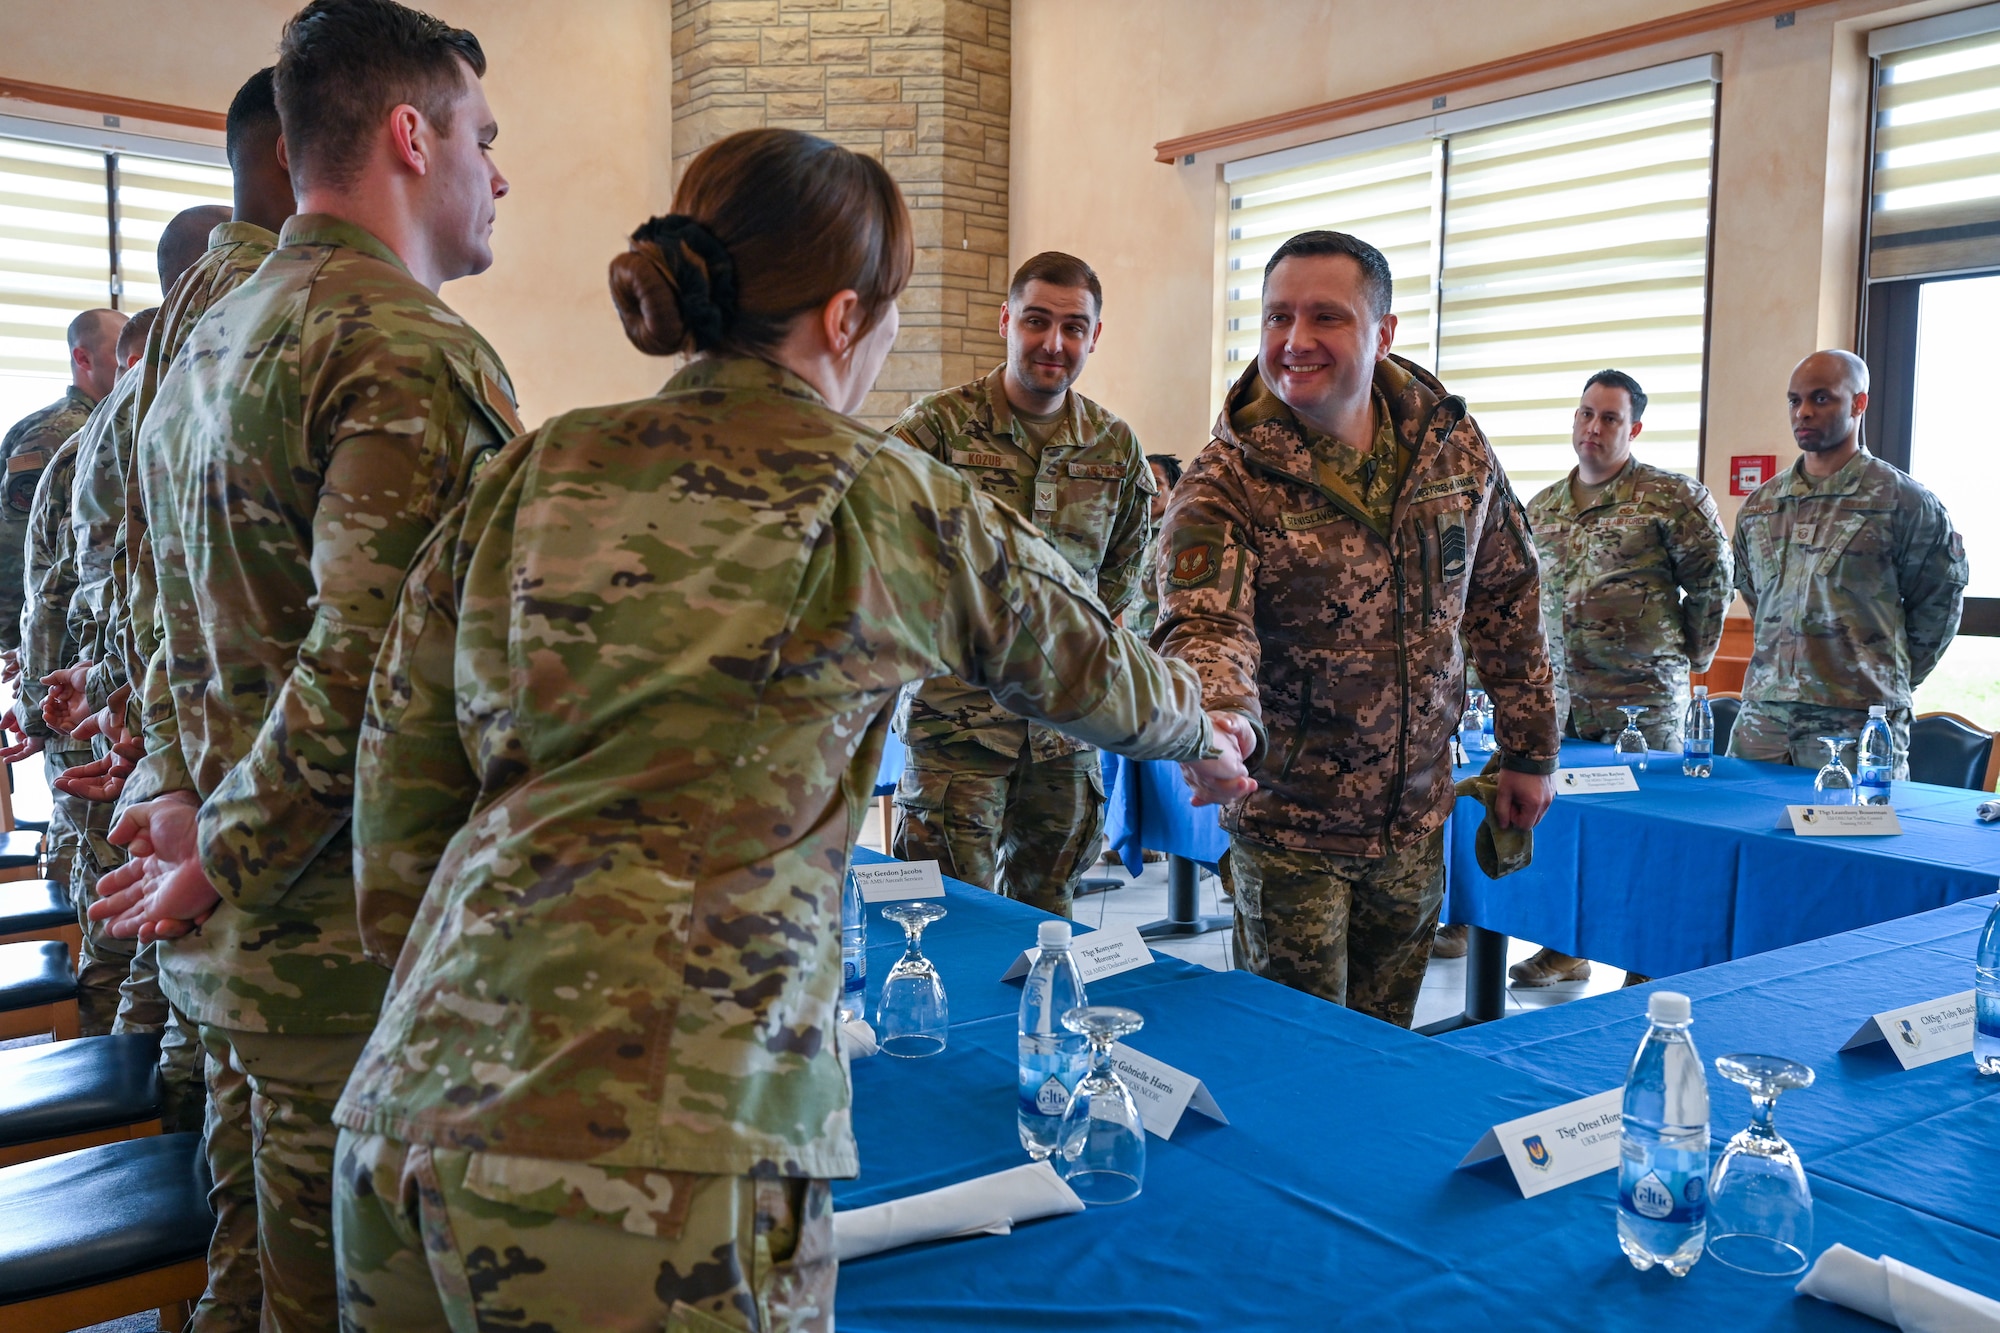 Chief Master Sgt. of the Air Force of the Armed Forces of Ukraine Kostiantyn Stanislavchuk, right, engages with Airmen during a luncheon